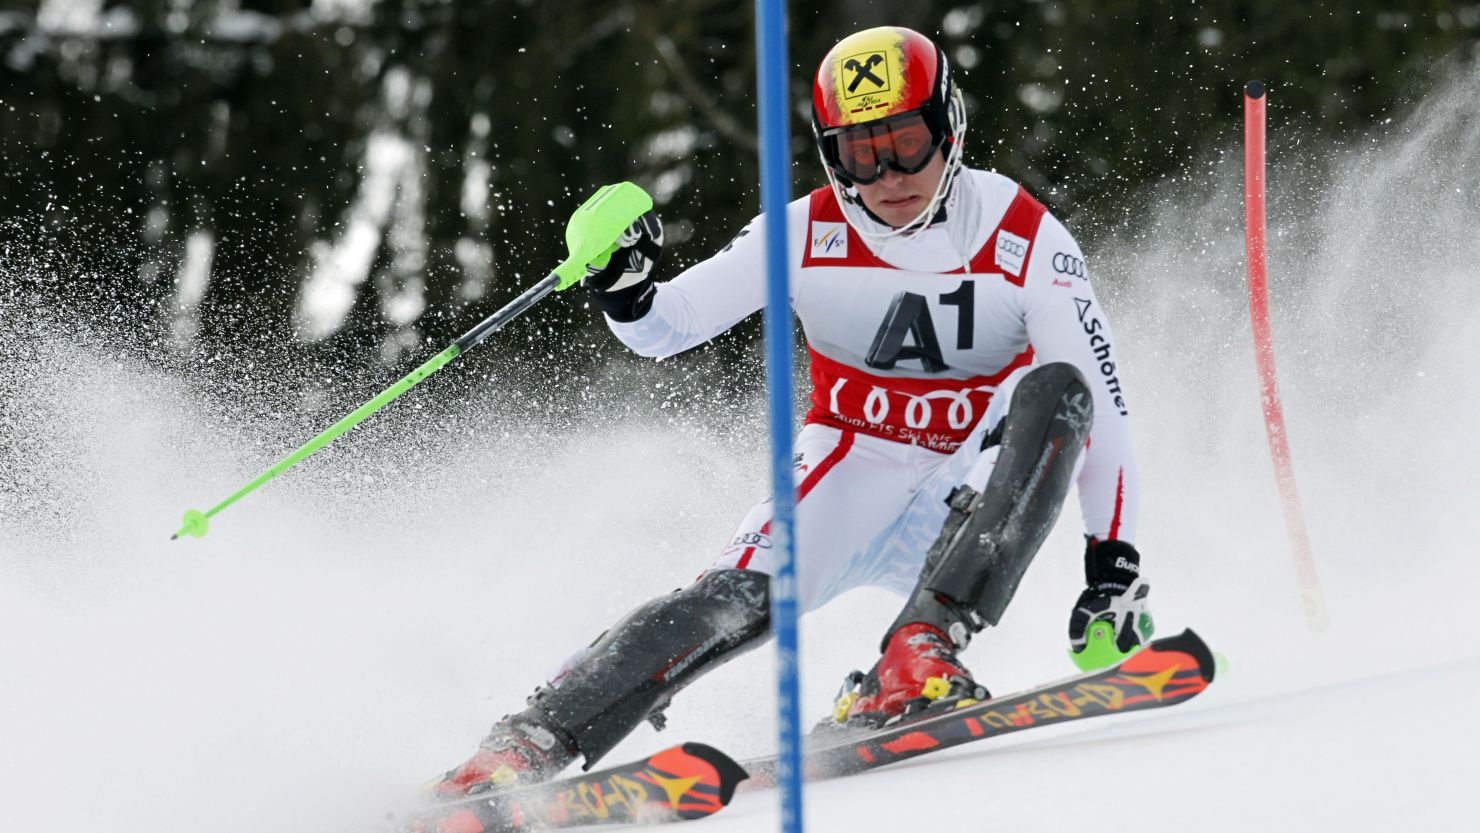  Austria's Marcel Hirscher powered  to a stunning victory in Sunday's World Cup slalom in Kitzbuhel, Austria.